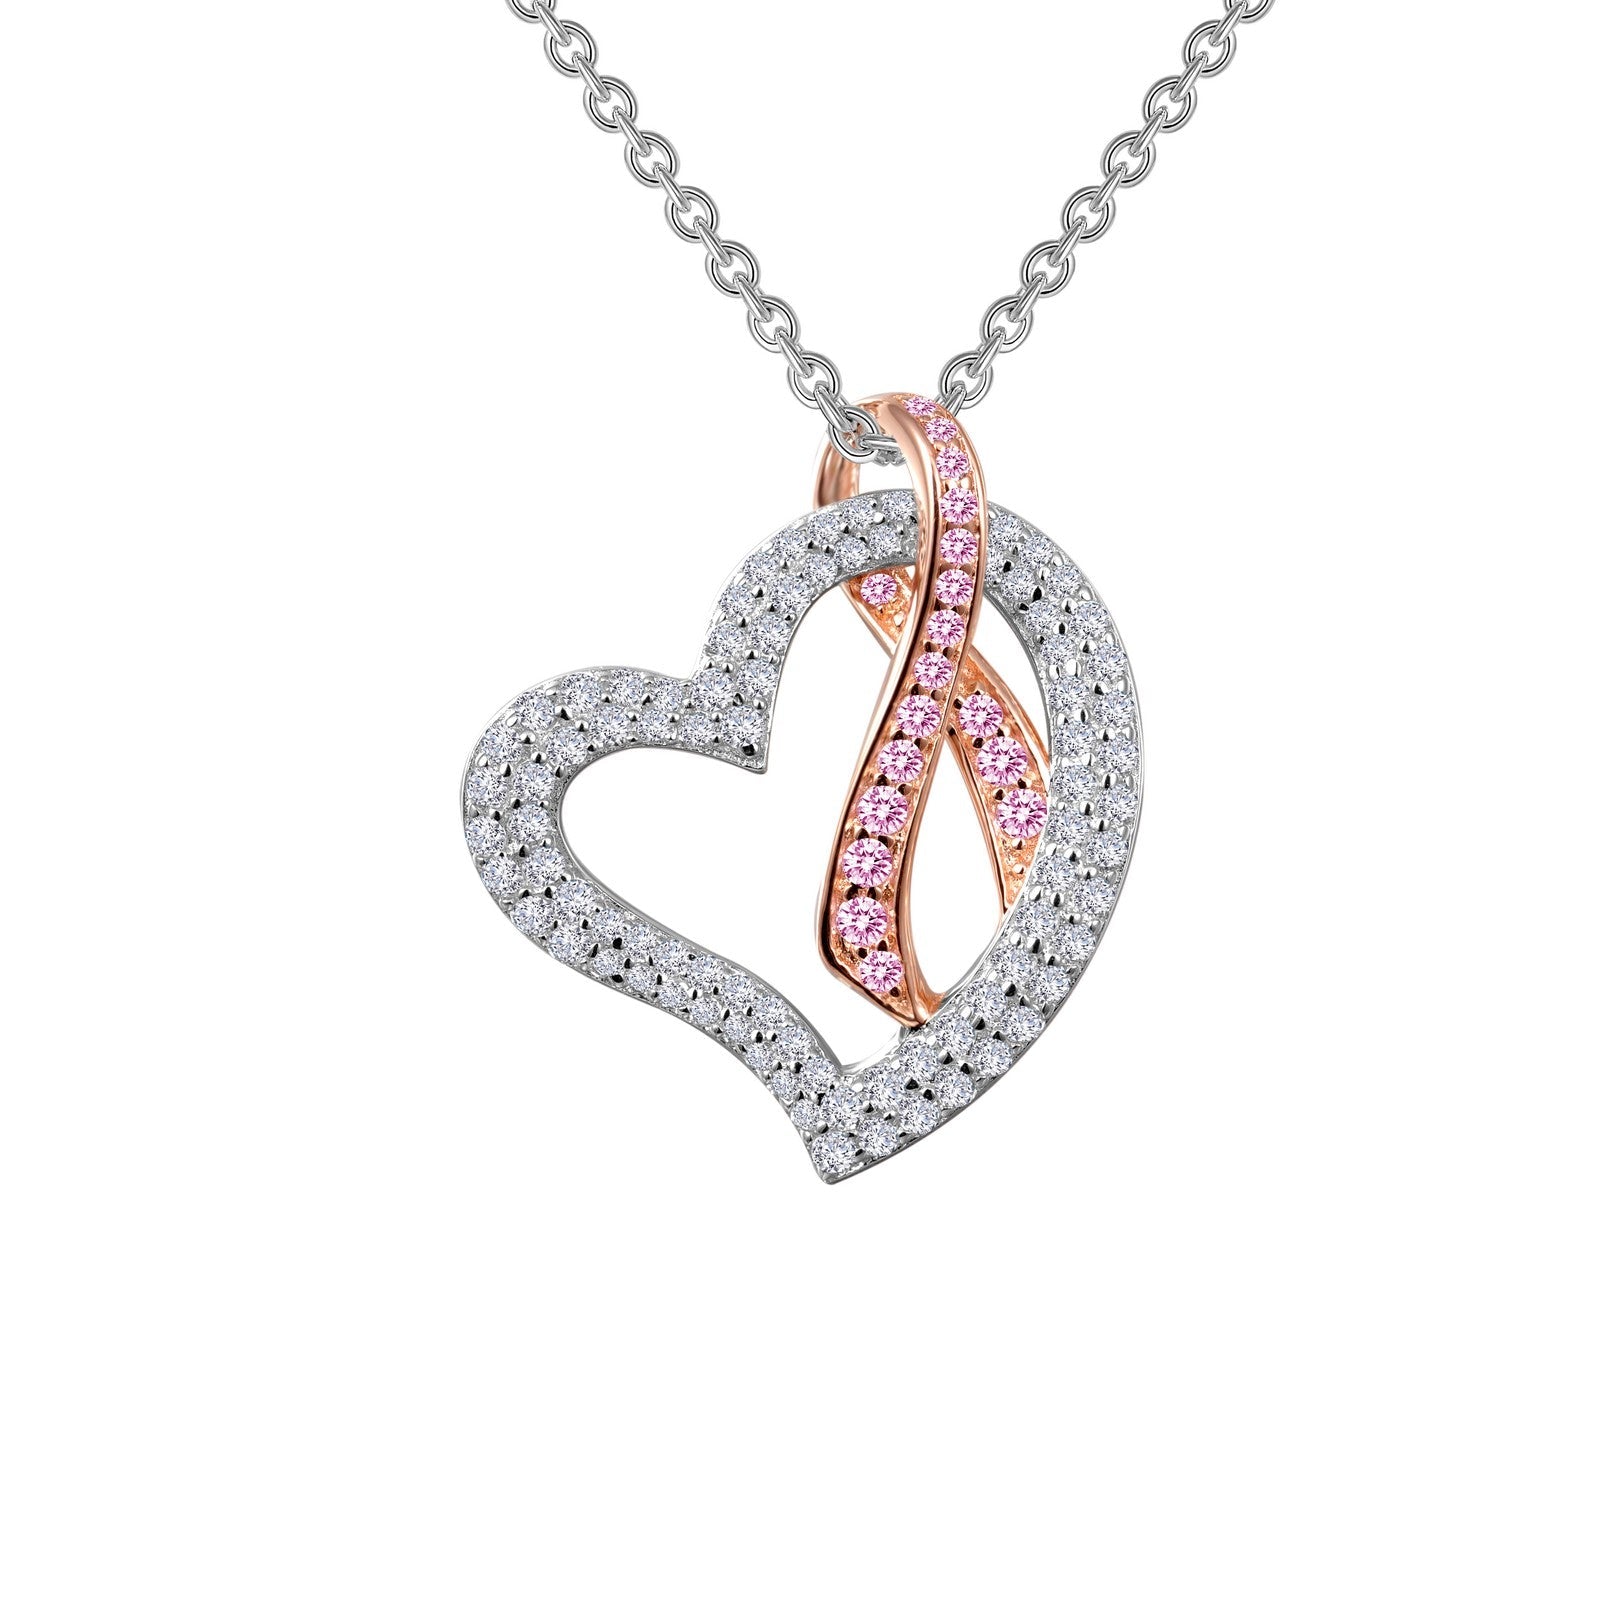 Pink Ribbon Heart Pendant Necklace-P0159CPP